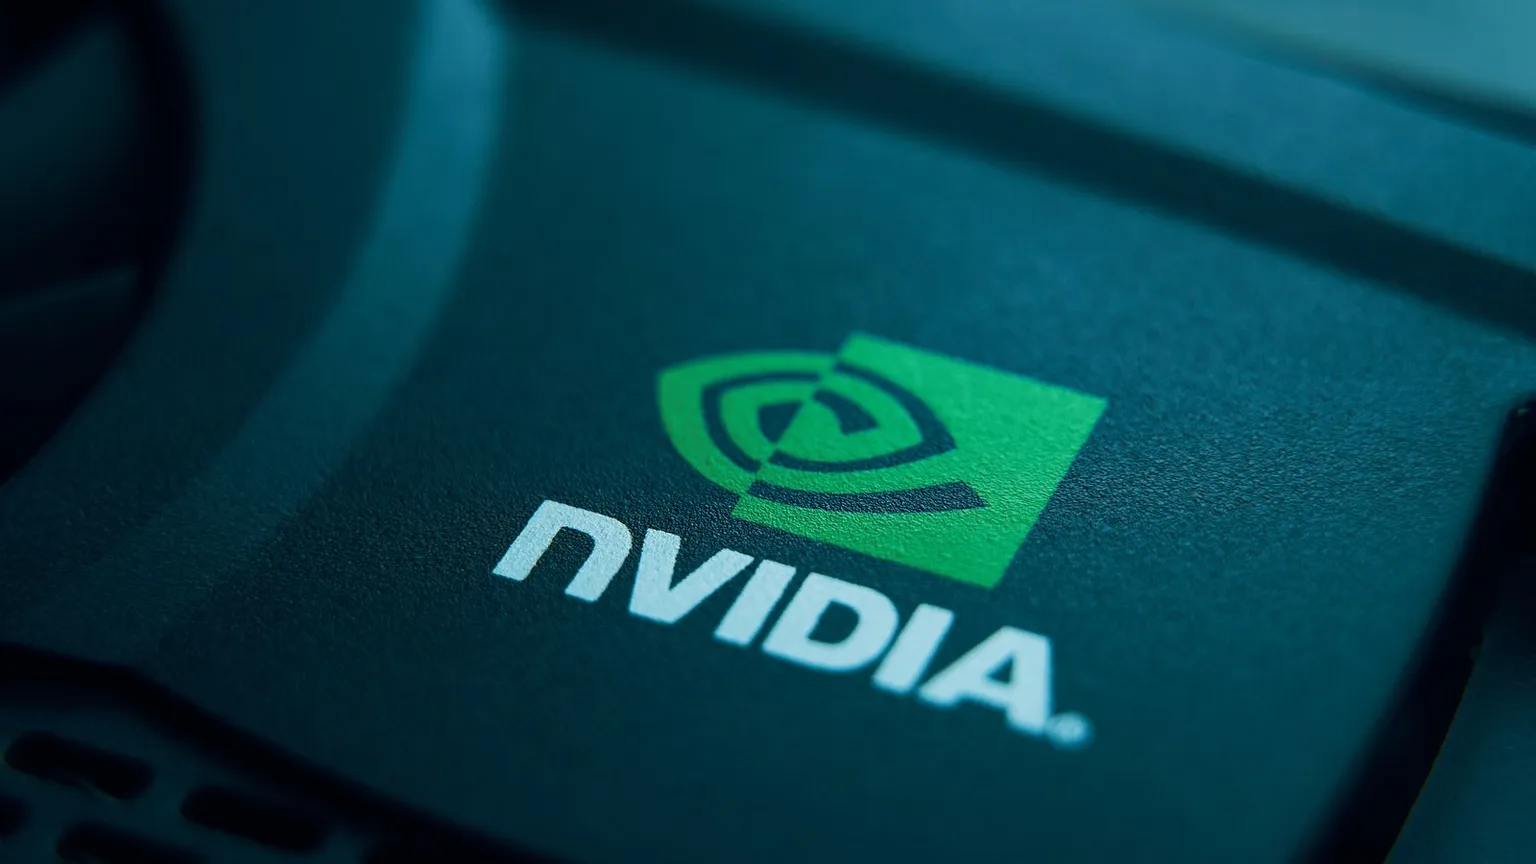 NVIDIA is one of the world's leading graphic chip producers. Image: Shutterstock